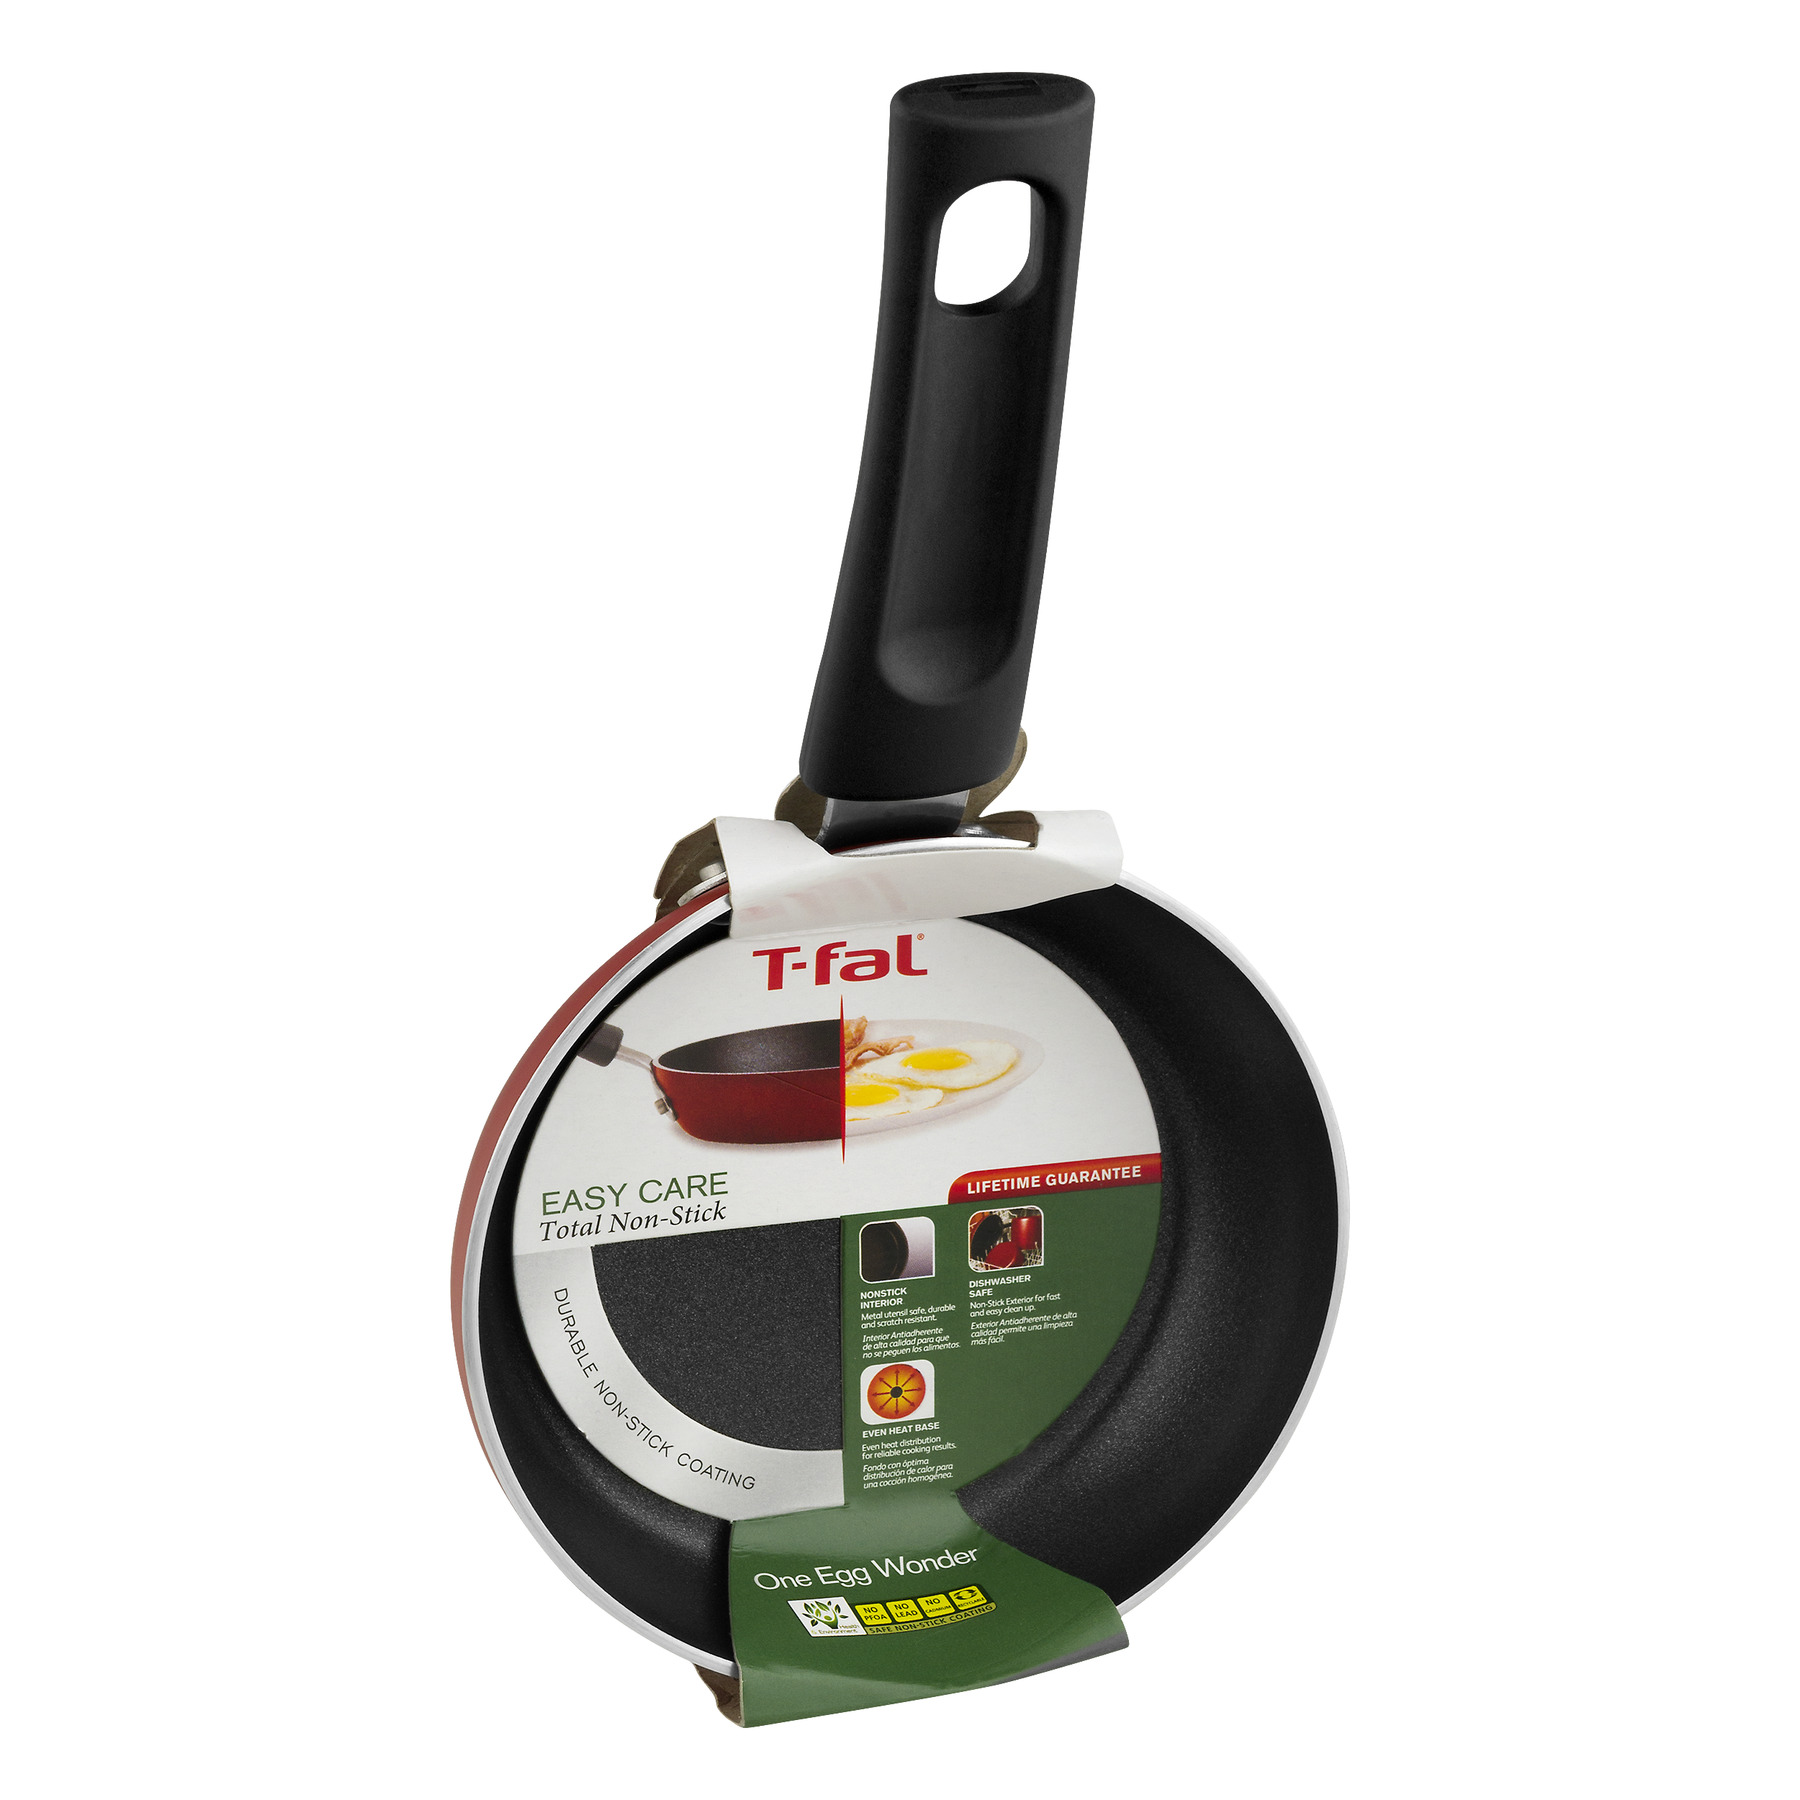 T-fal, Specialty Nonstick, One Egg Wonder 4.5 In. Fry Pan, Red - image 3 of 7